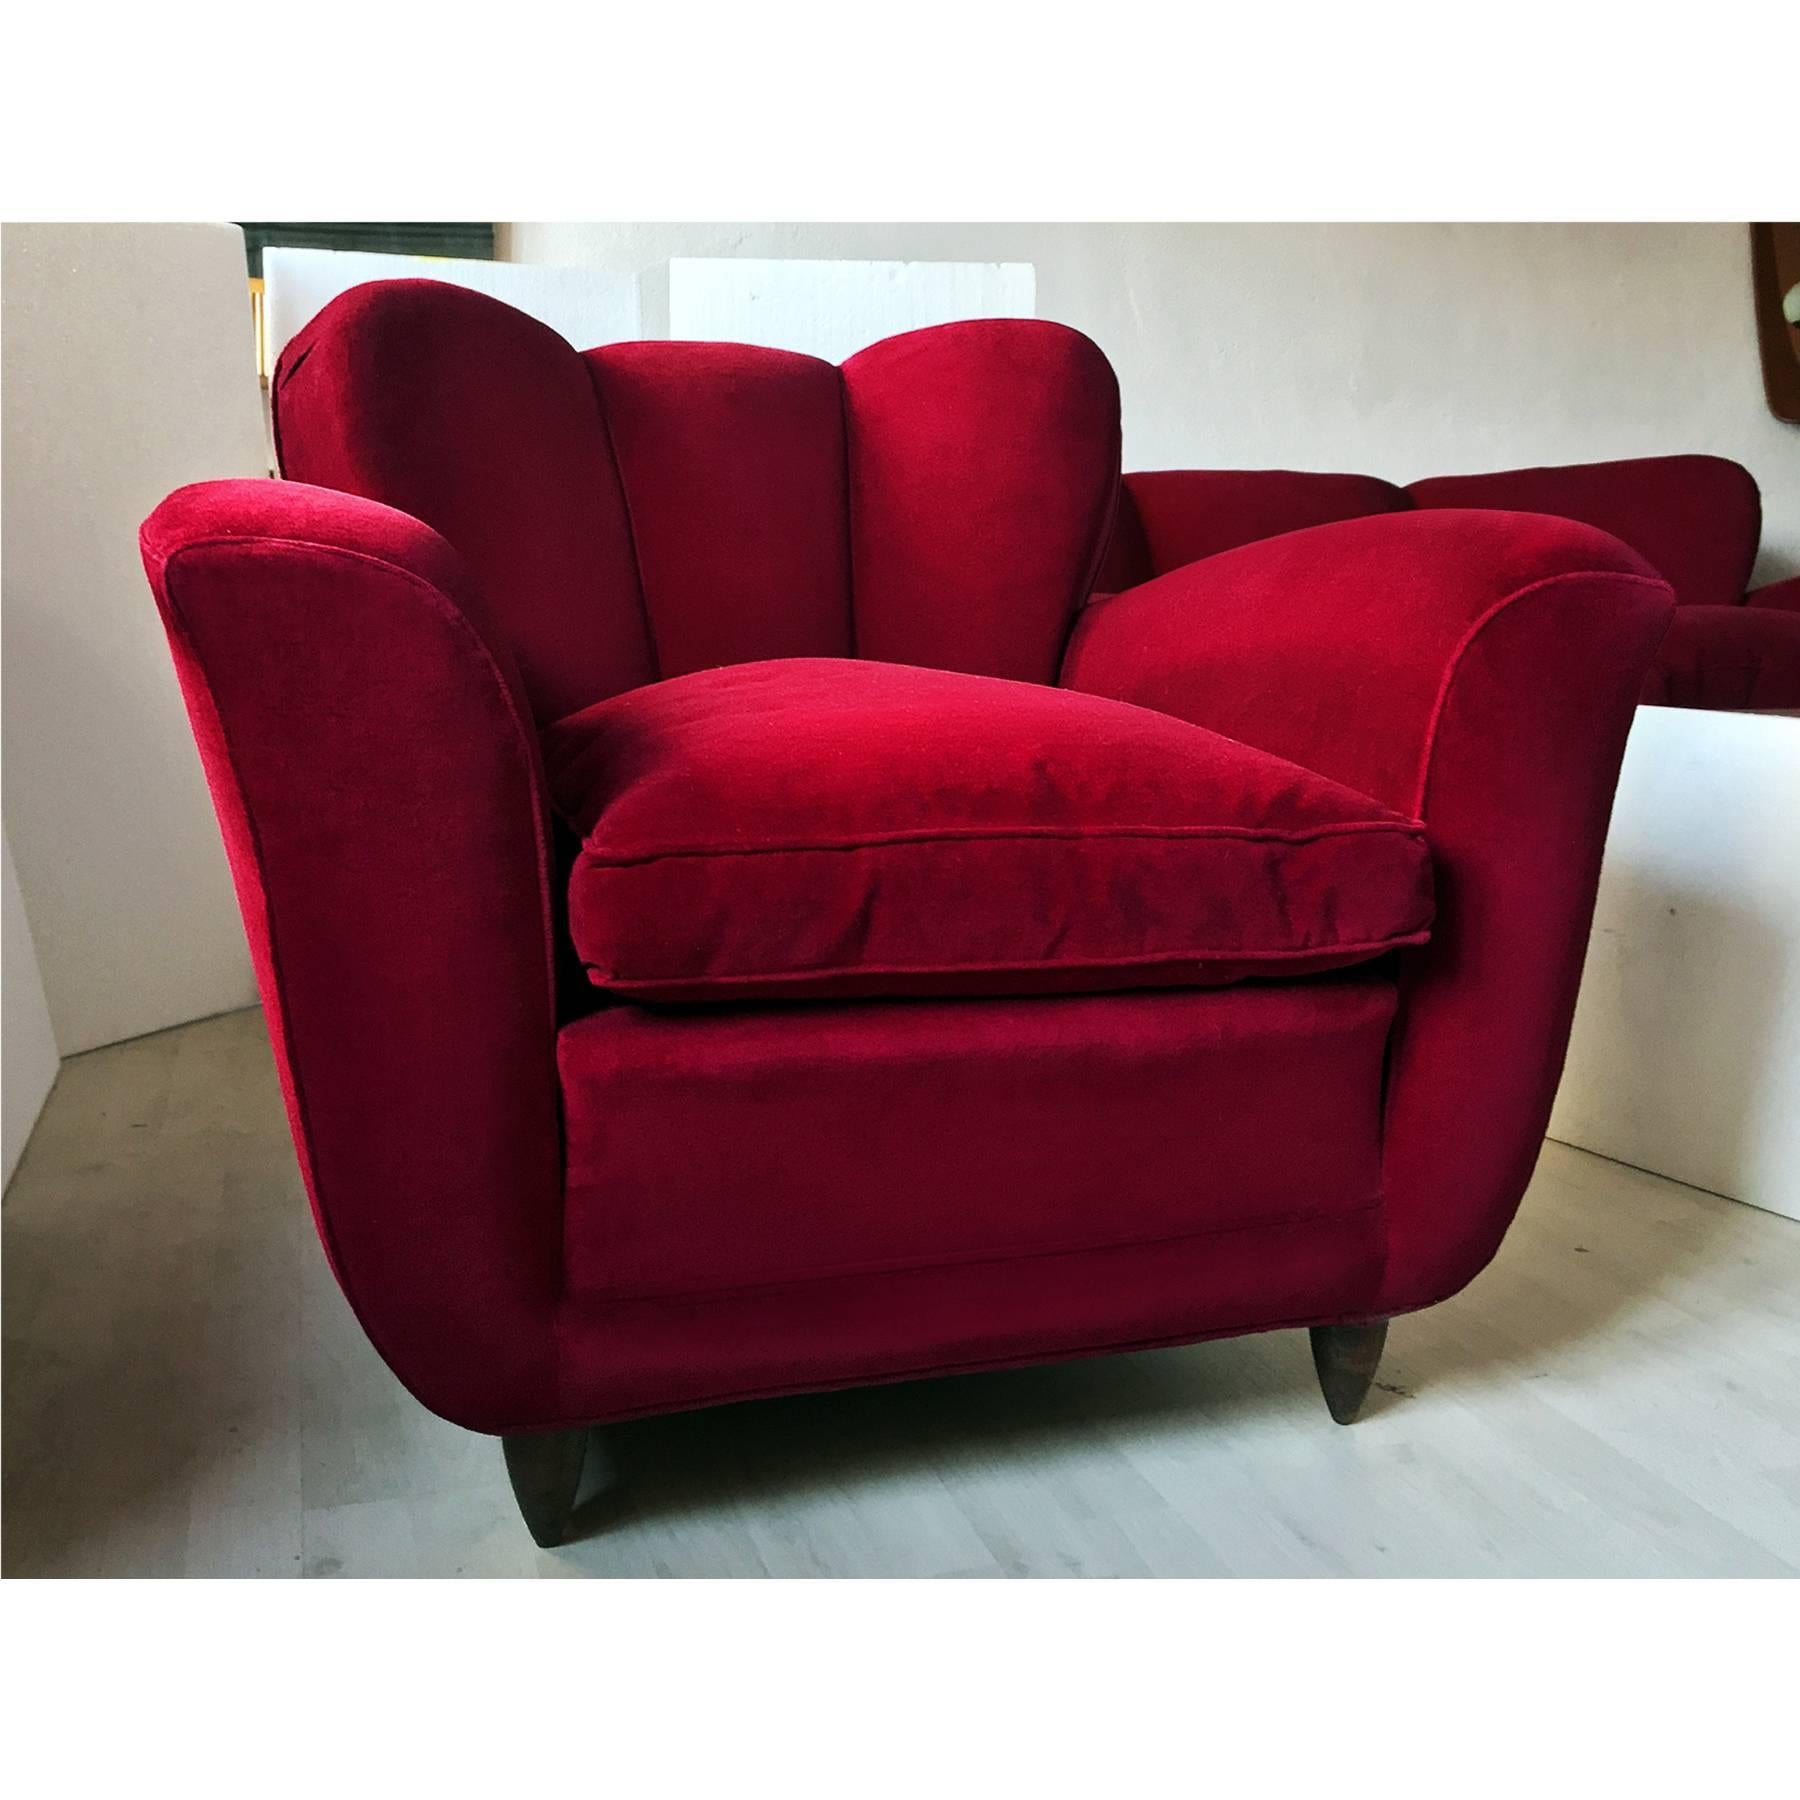 Very stylish and extremely comfortable Italian pair of armchairs with winged backs, design attributable to Guglielmo Ulrich in the 1950s.
They are upholstered in a gorgeous deep scarlet red velvet original of the period, preserved in excellent